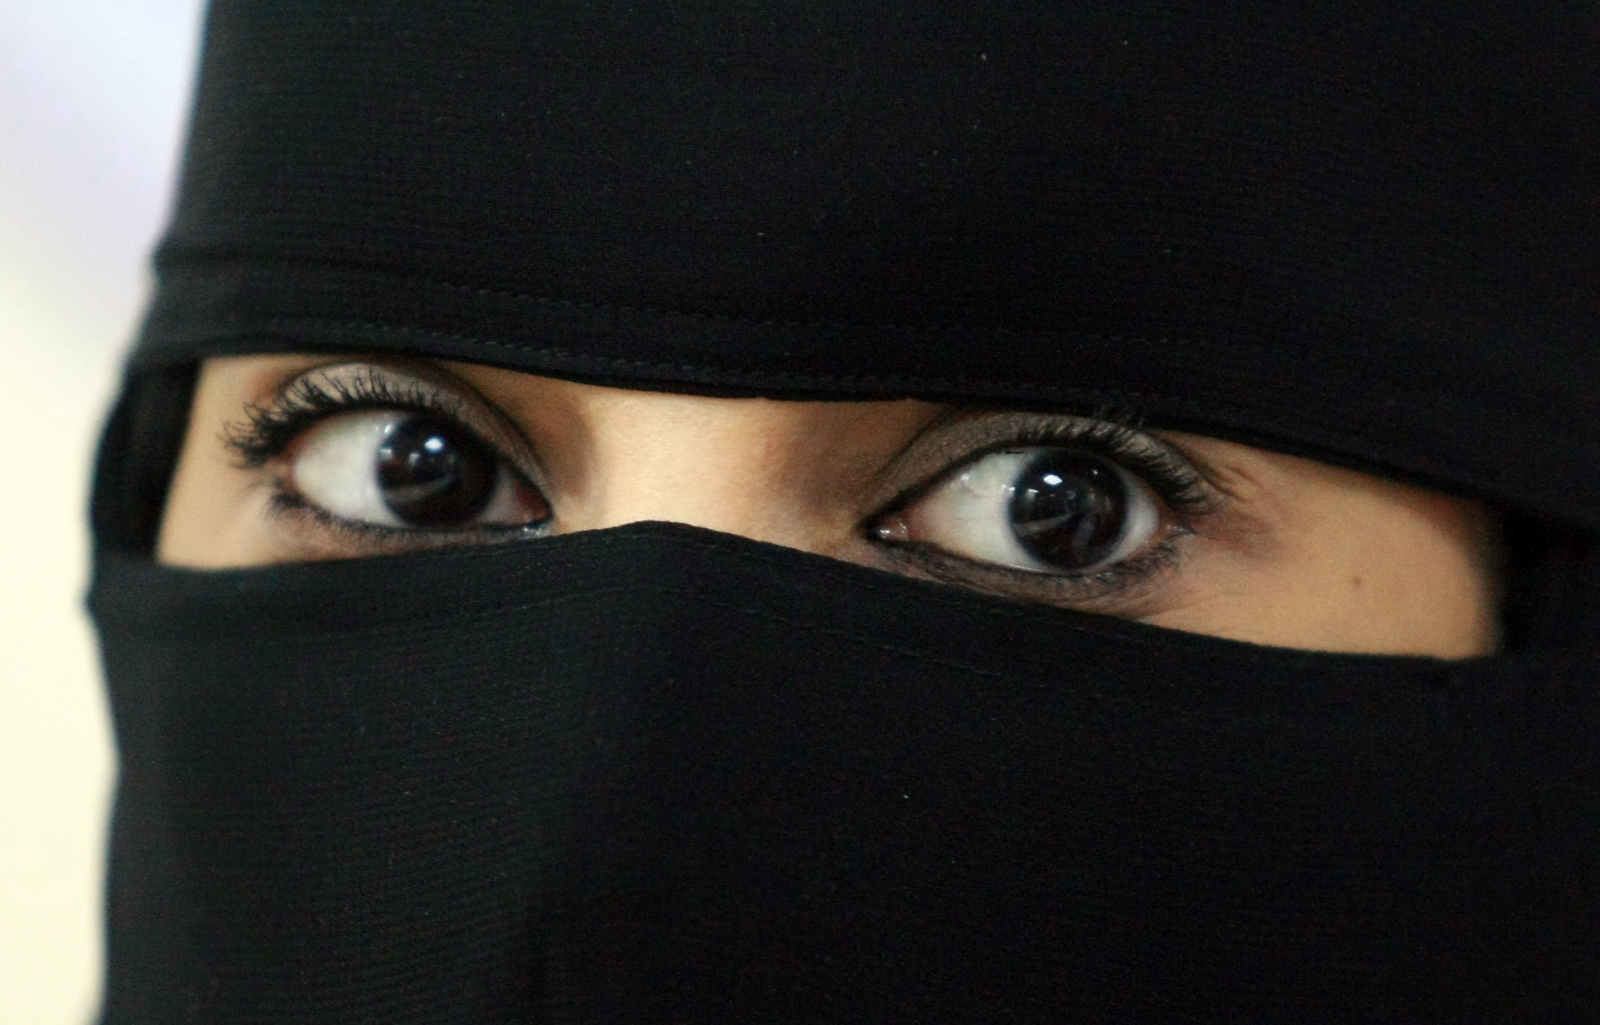 Saudi Arabia: Student kicked off bus for removing veil